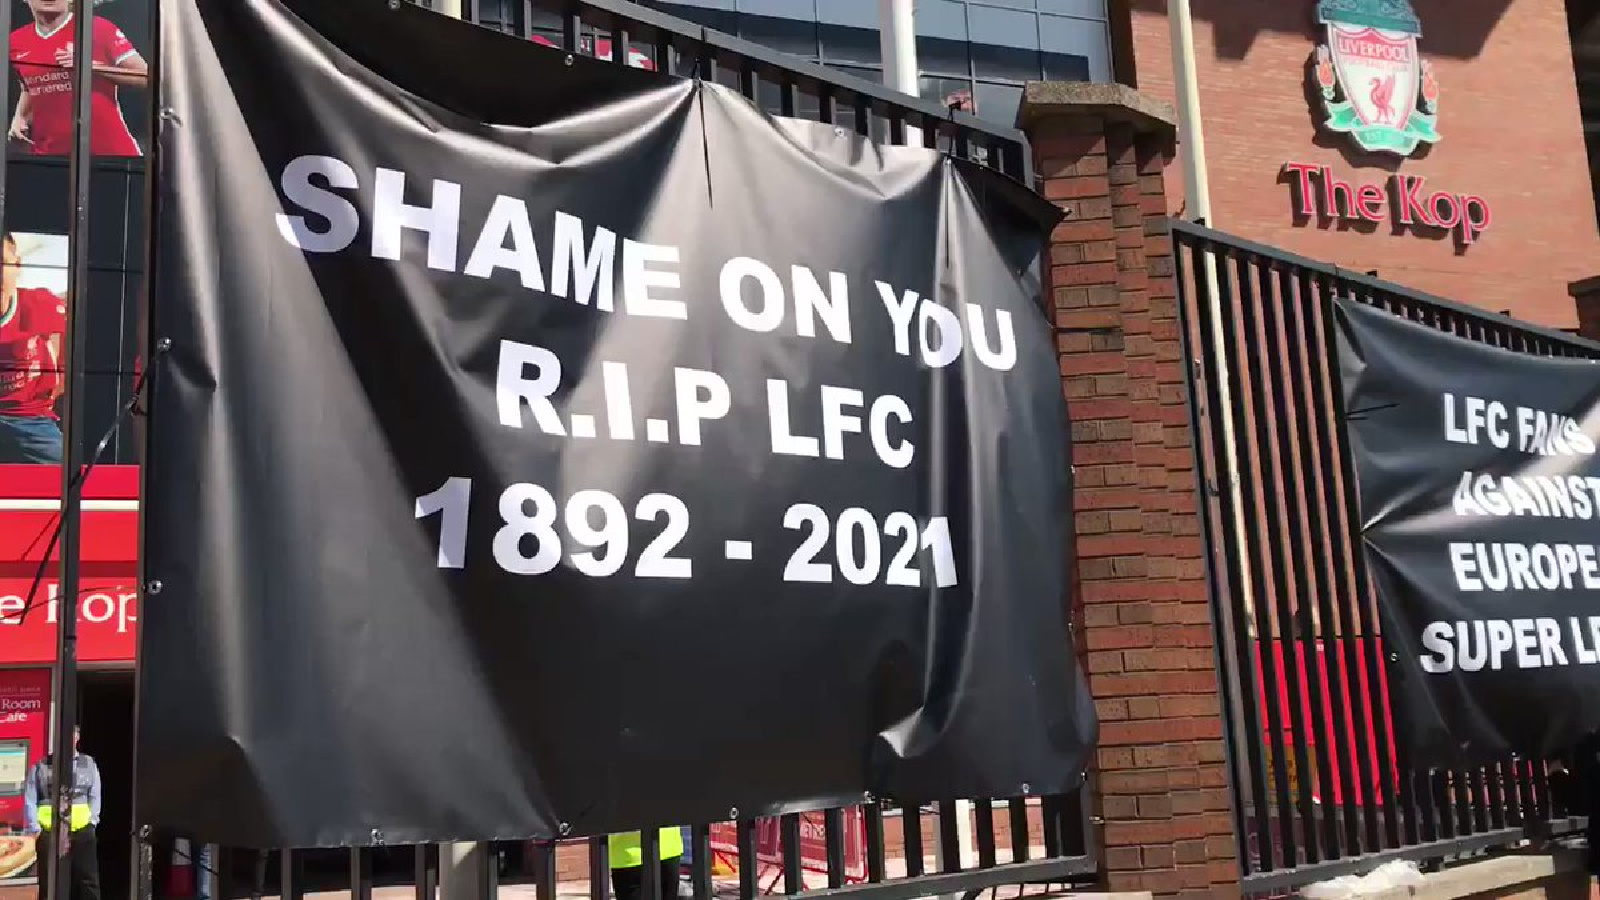 Liverpool fans protest against the Super League as 'RIP LFC' banner is hung outside Anfield